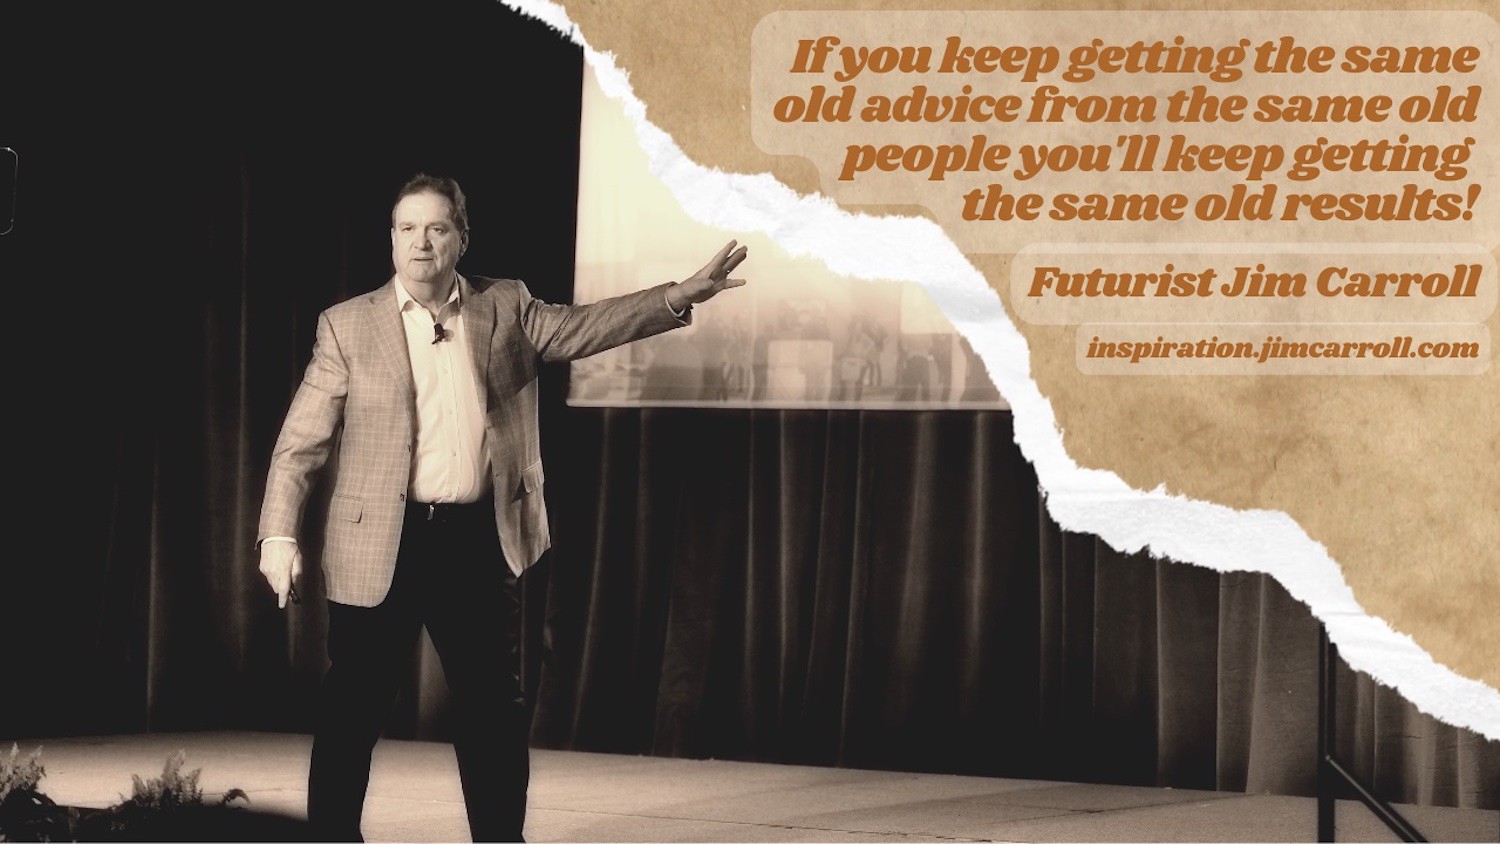 "If you keep getting the same old advice from the same old people you'll keep getting the same old results!" - Futurist Jim Carroll